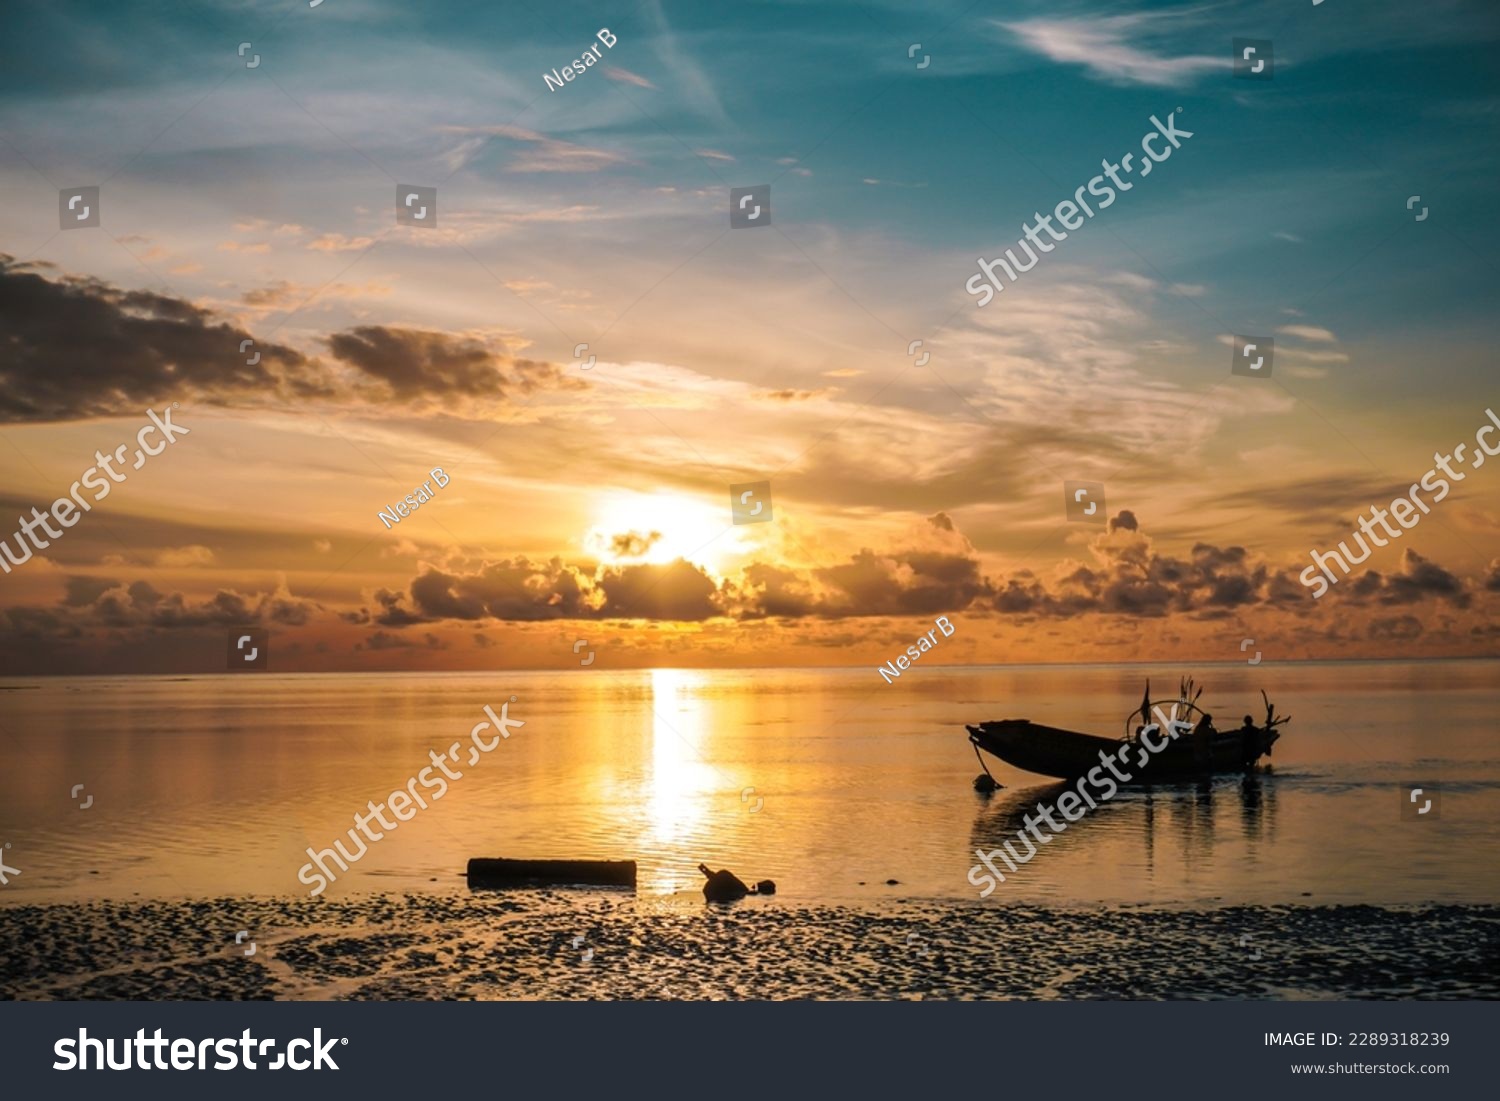 The golden sun rises over the Andaman Sea, casting a warm glow over the tranquil water. A parked boat bobs gently on the ocean, ready for a day of adventure in paradise #2289318239